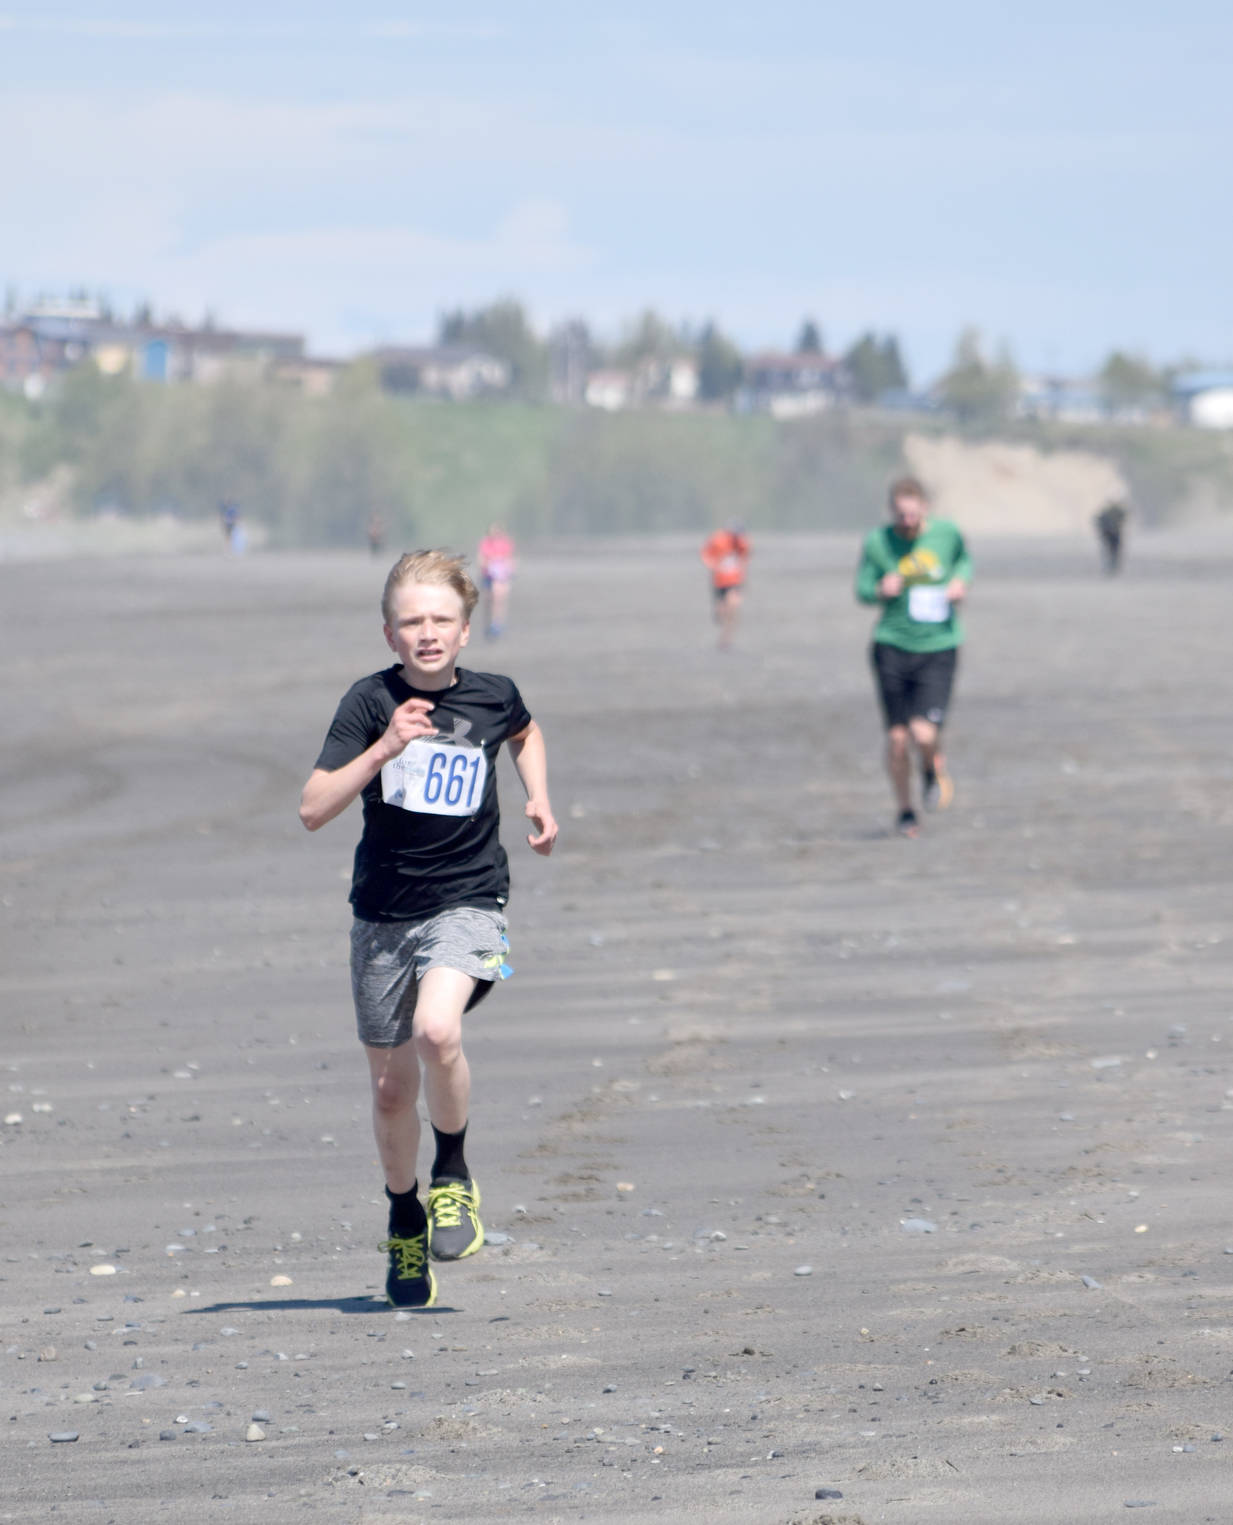 Jack Laker finishes off his victory in the three-mile run at the Mouth to Mouth Wild Run and Ride on Monday at the Kenai beach. (Photo by Jeff Helminiak/Peninsula Clarion)